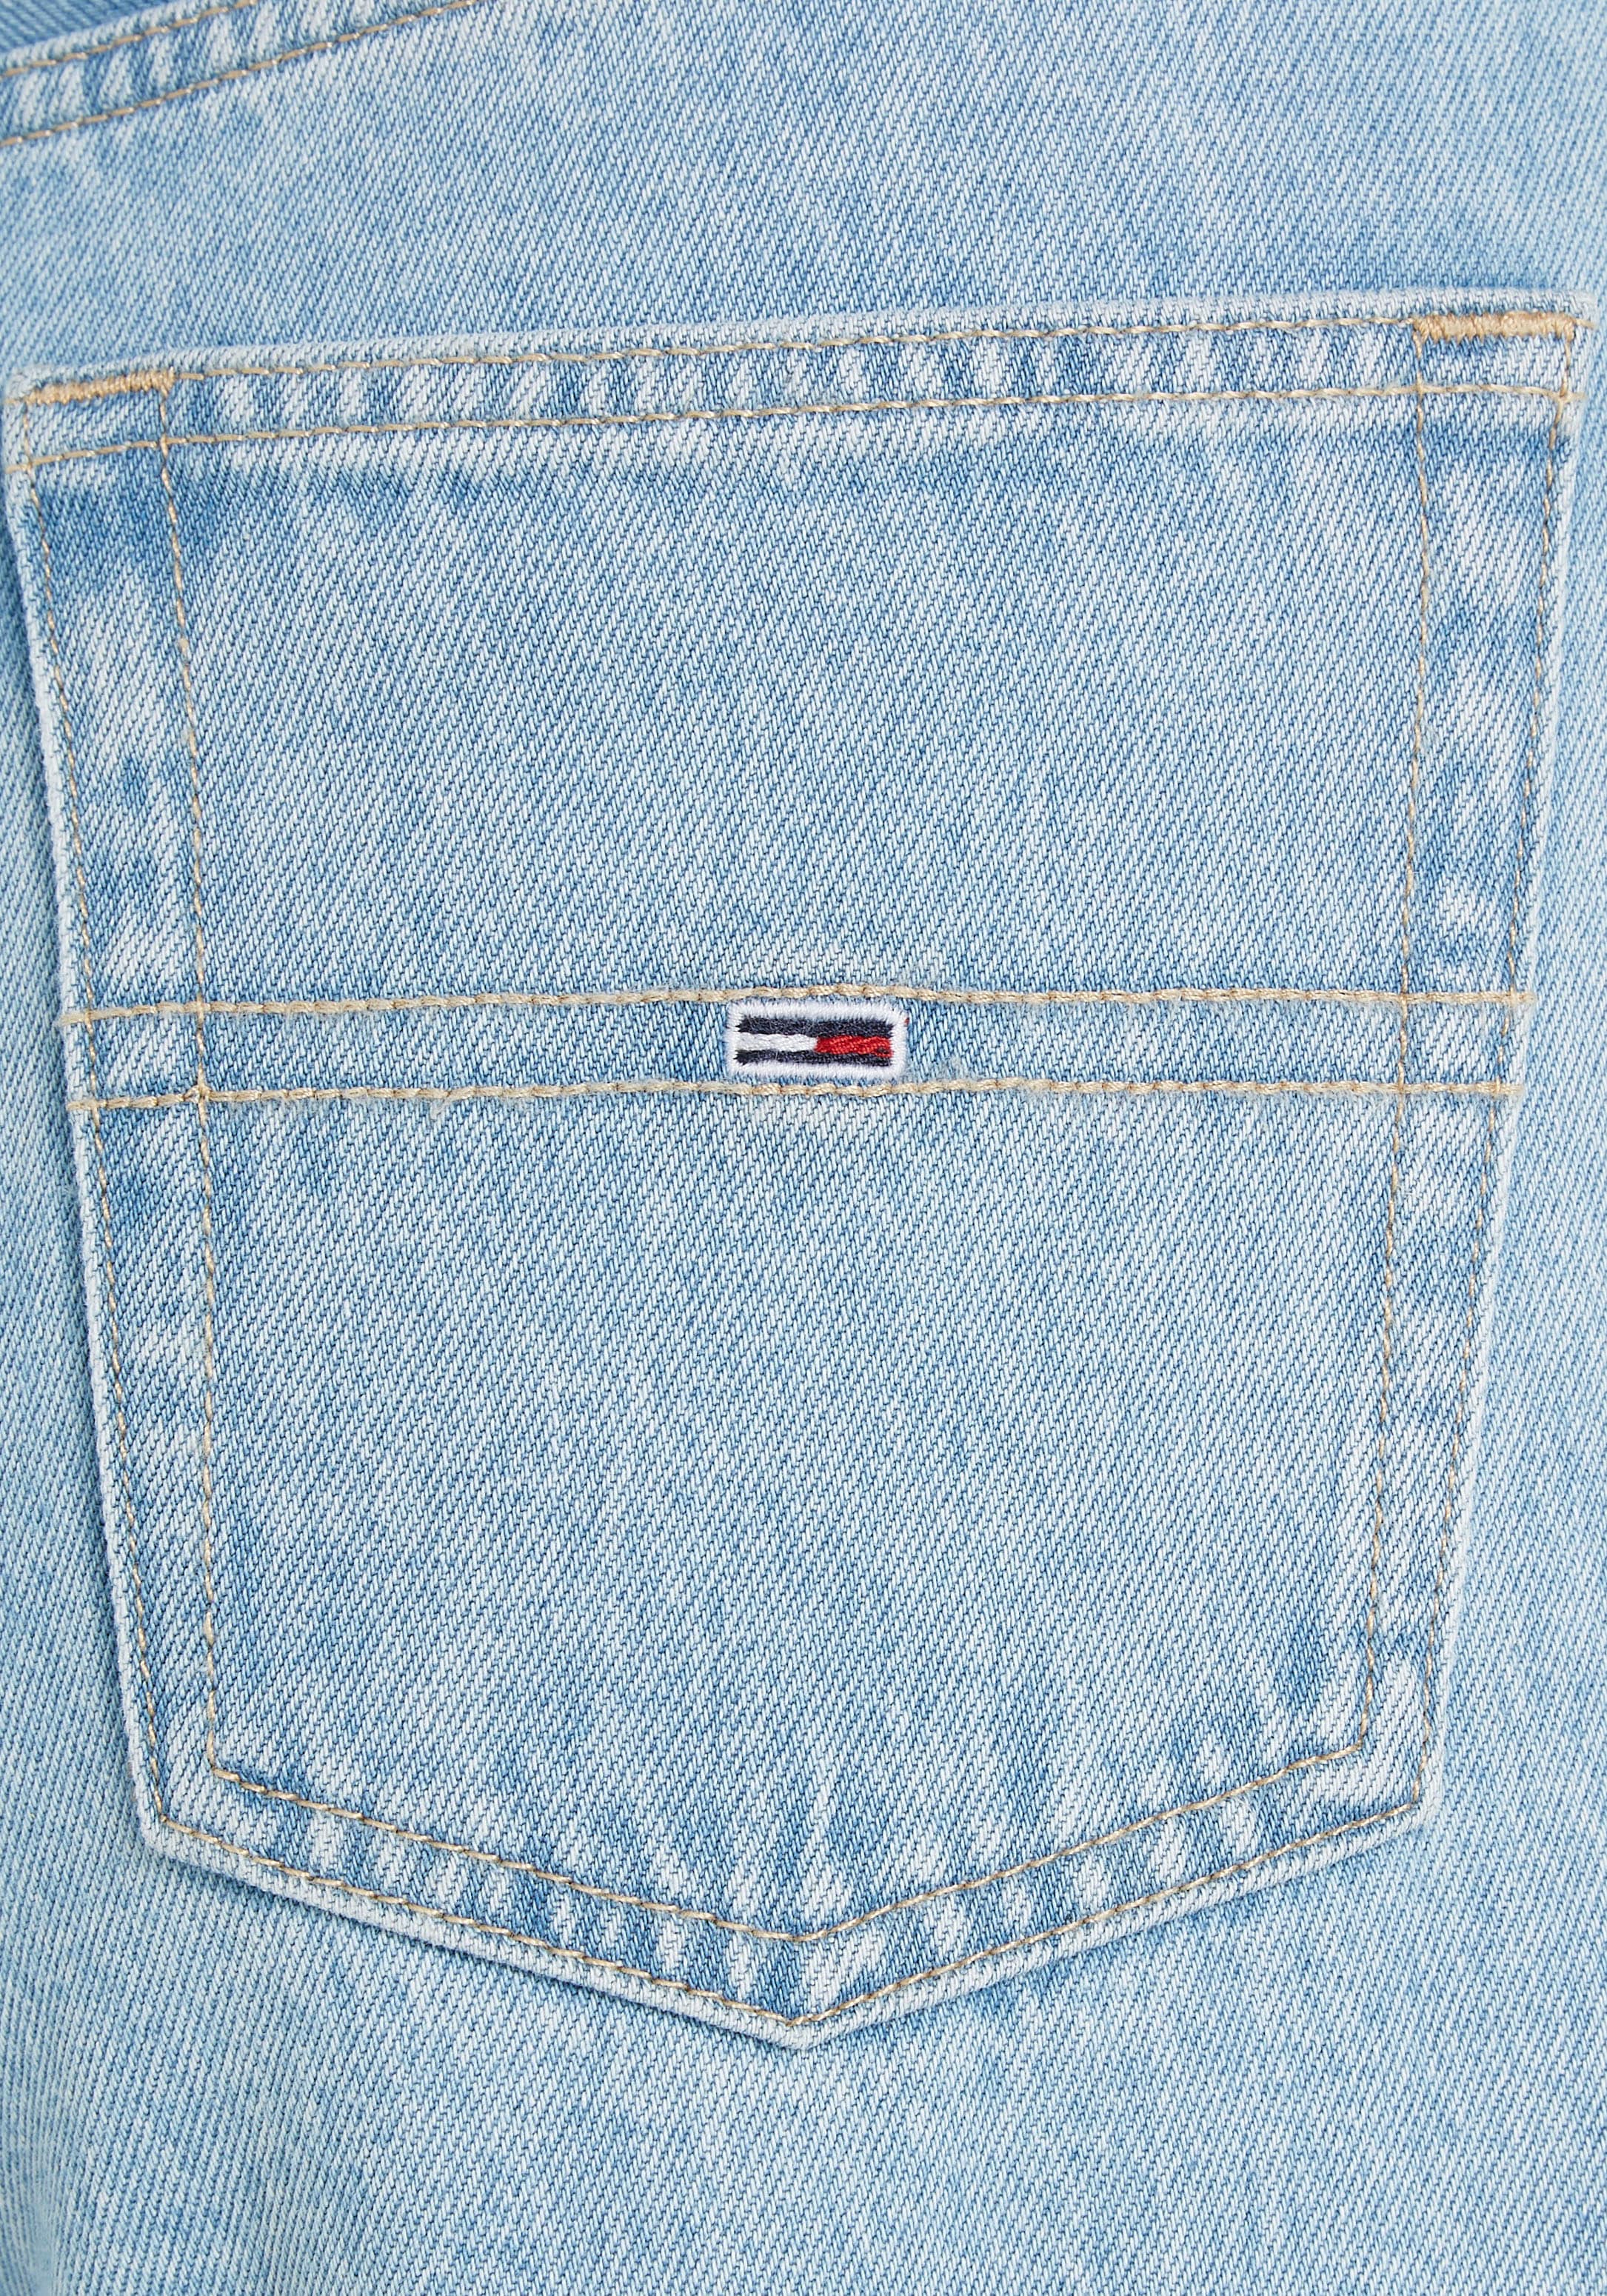 Jeans Tommy kaufen Jeans UNIVERSAL | Jeans, Weite mit Tommy Logobadges online